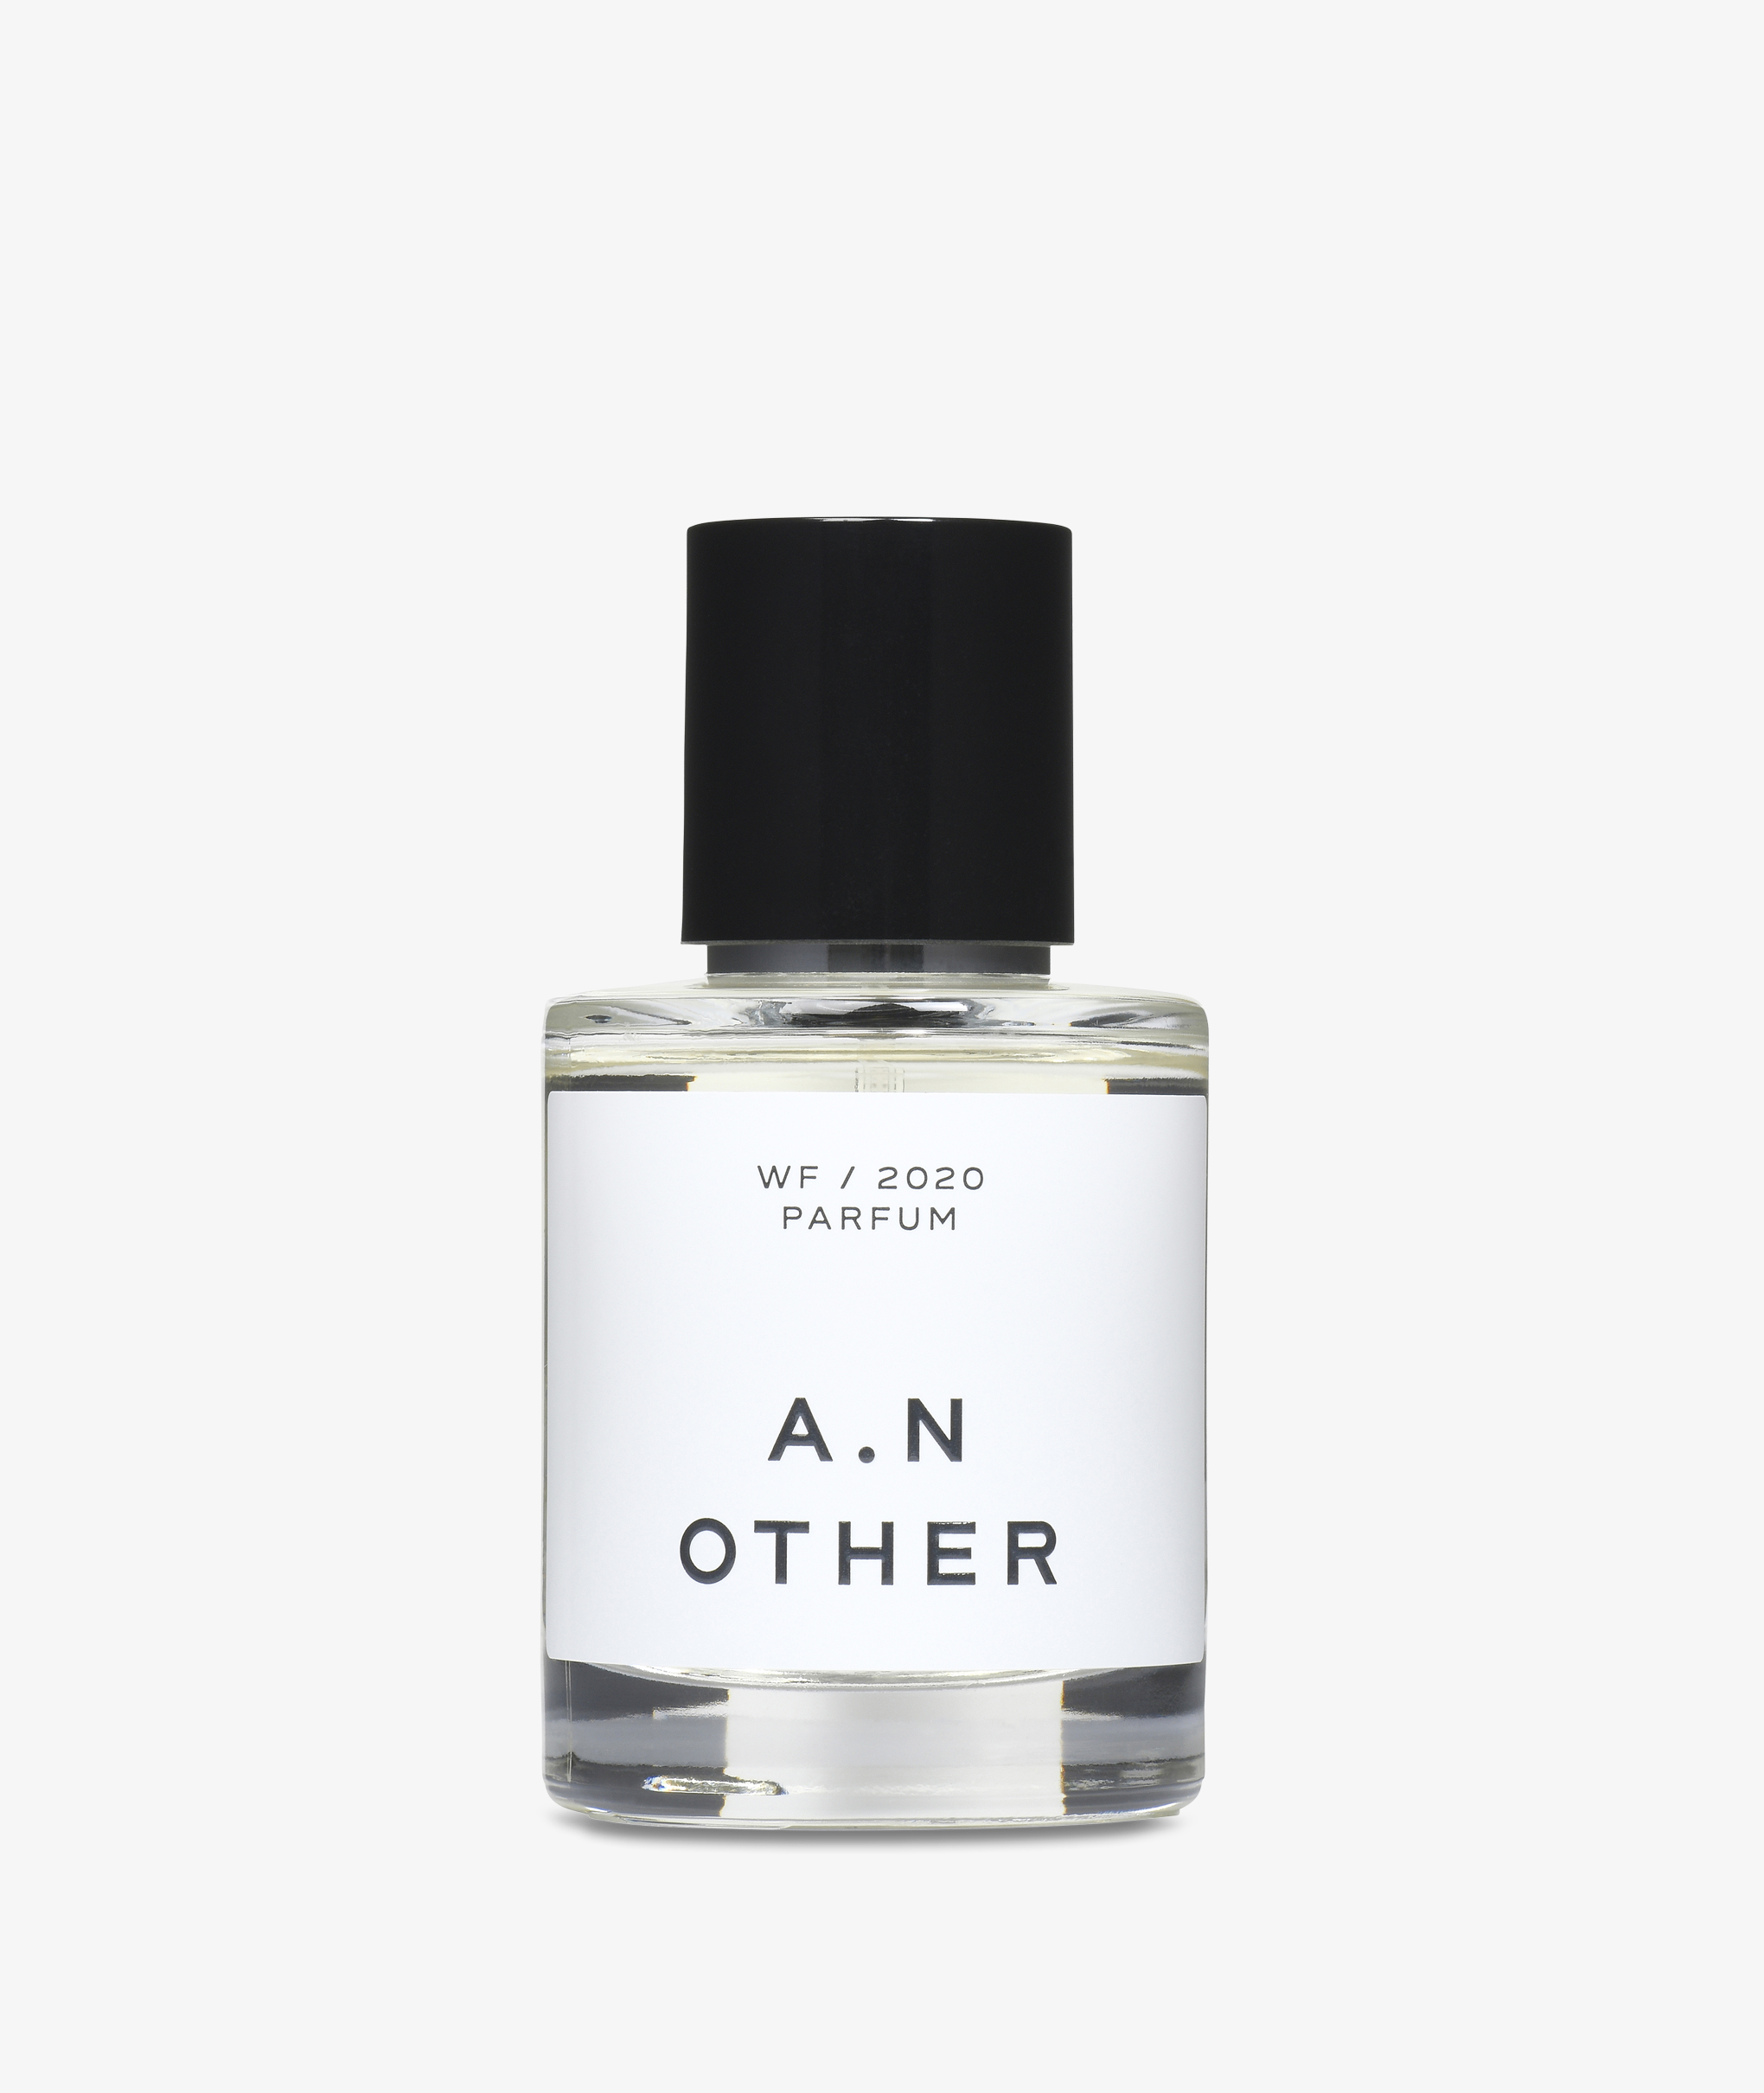 Norse Store | Shipping Worldwide - A.N Other WF/2020 - 50ml